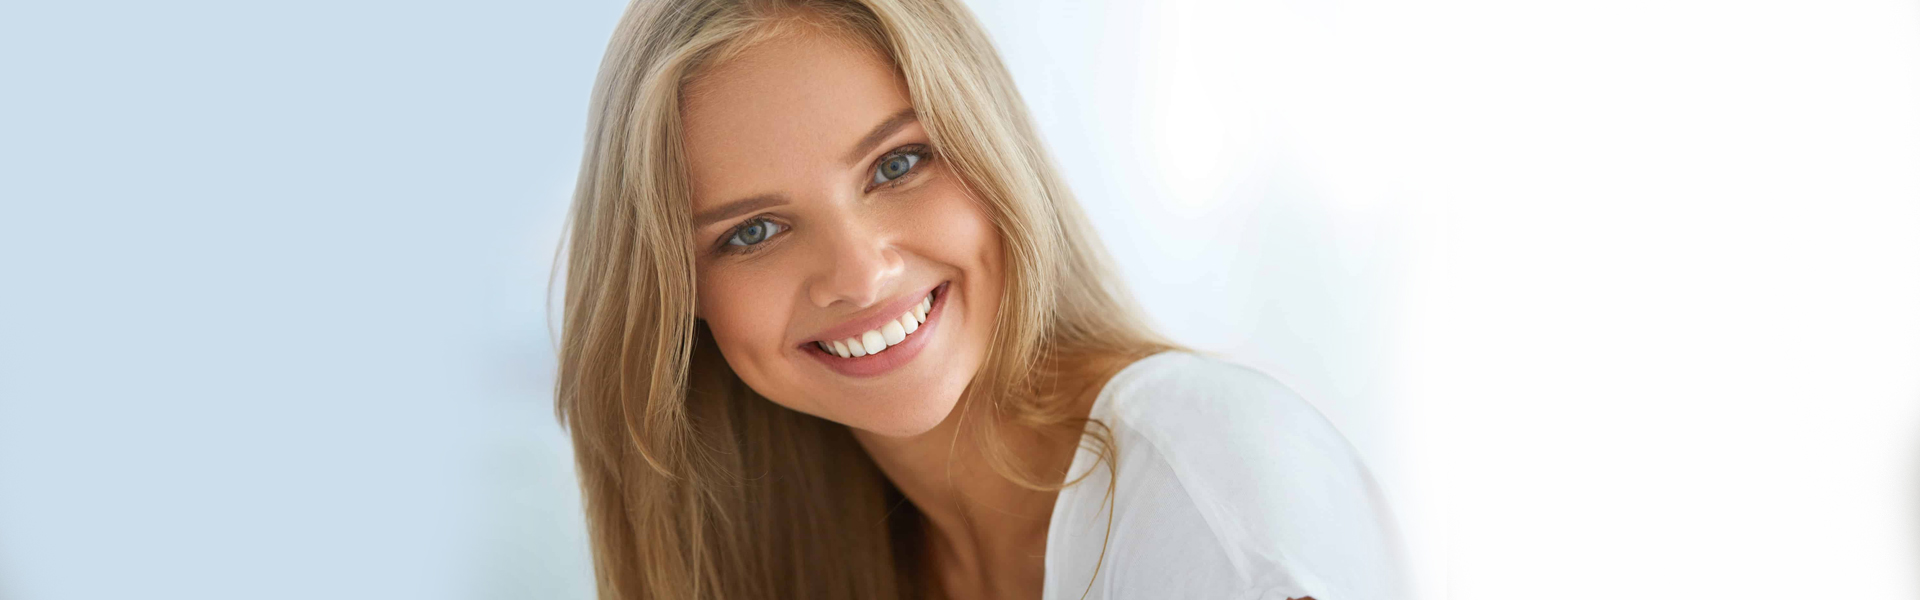 Dentistry in Affton providing general and cosmetic dental treatments simultaneously